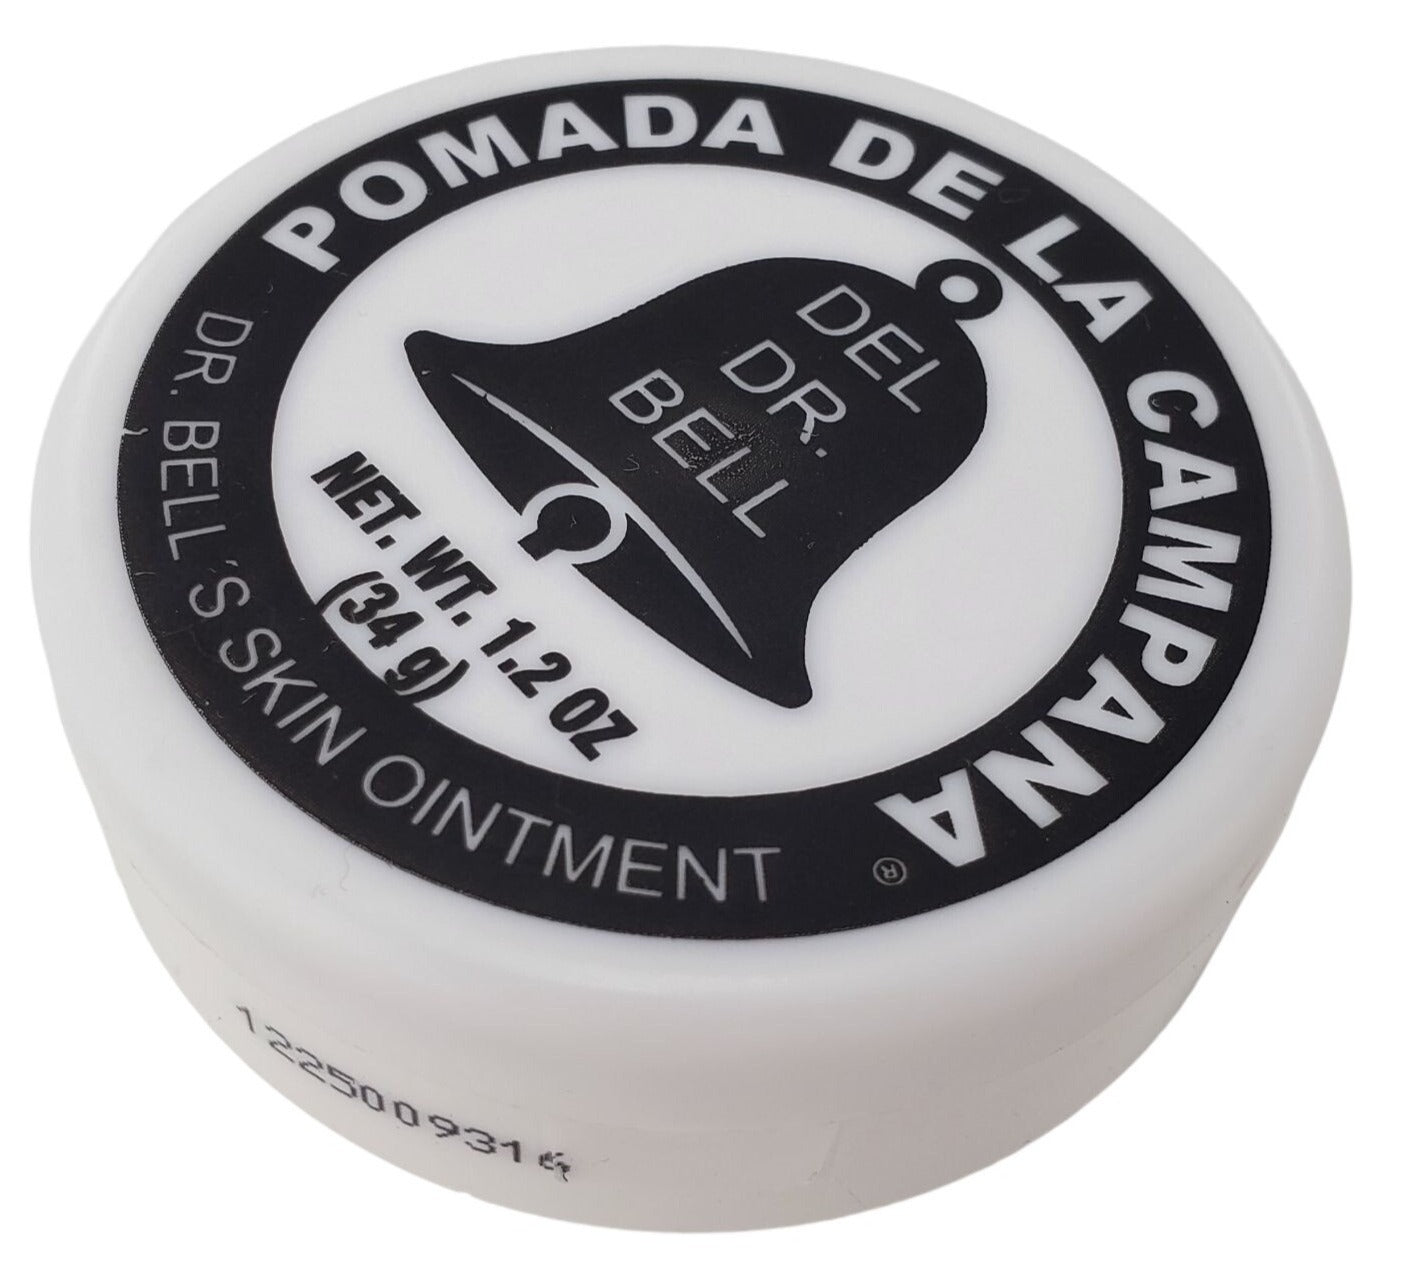 Del DR Bell Pomade Skin Ointment with Allantoin, Pomada De La Campana 1.2 Ounce Container